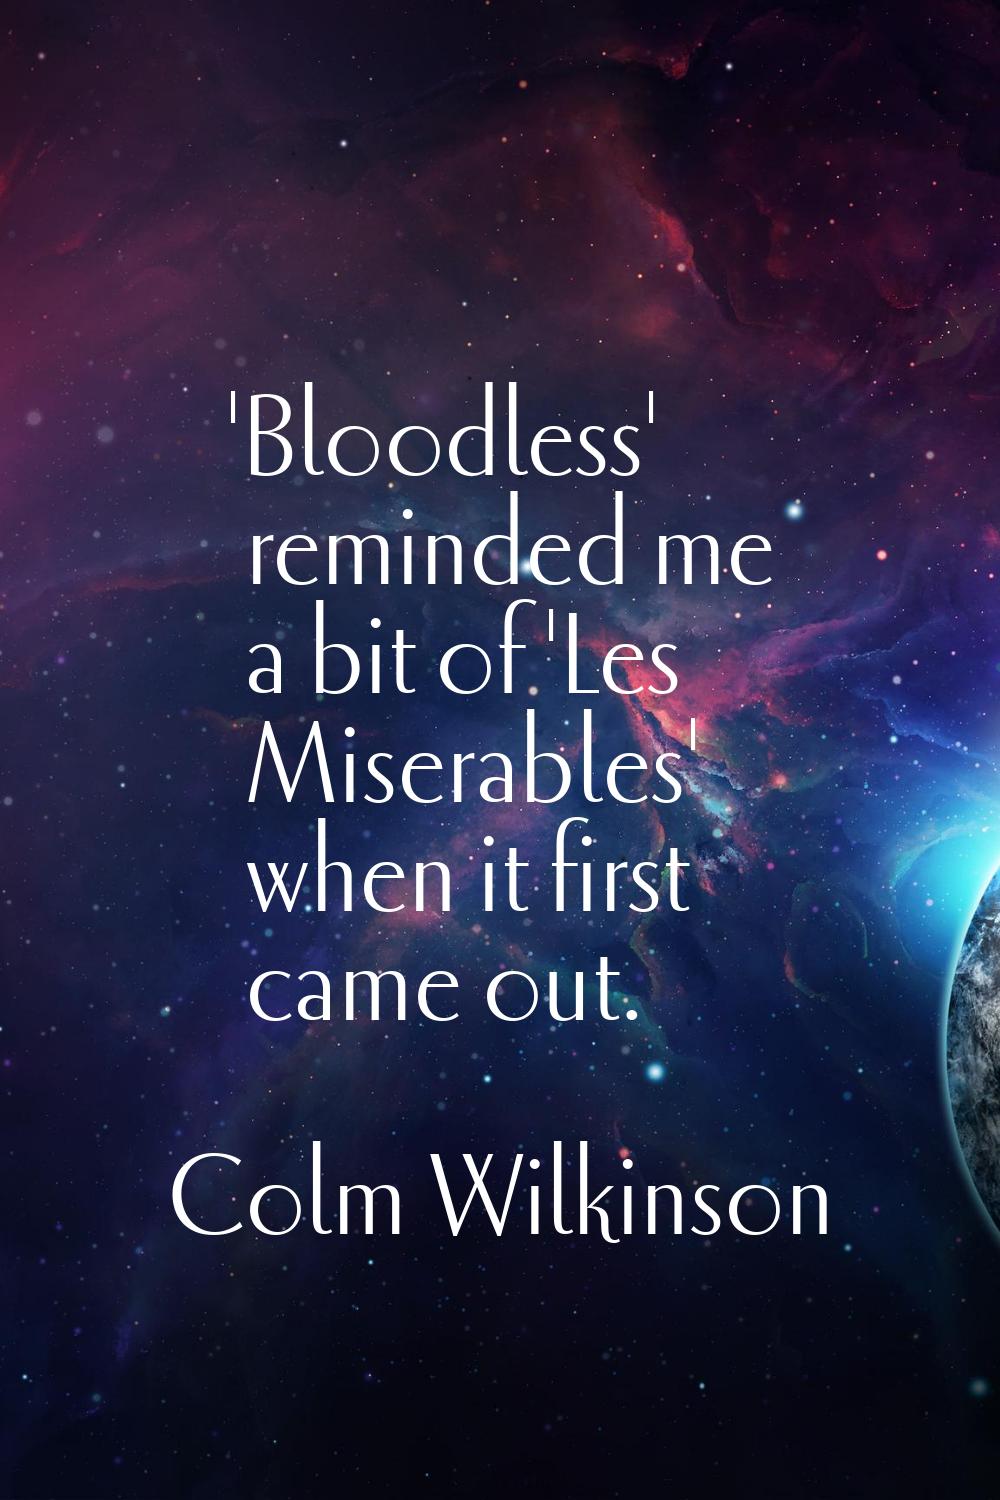 'Bloodless' reminded me a bit of 'Les Miserables' when it first came out.